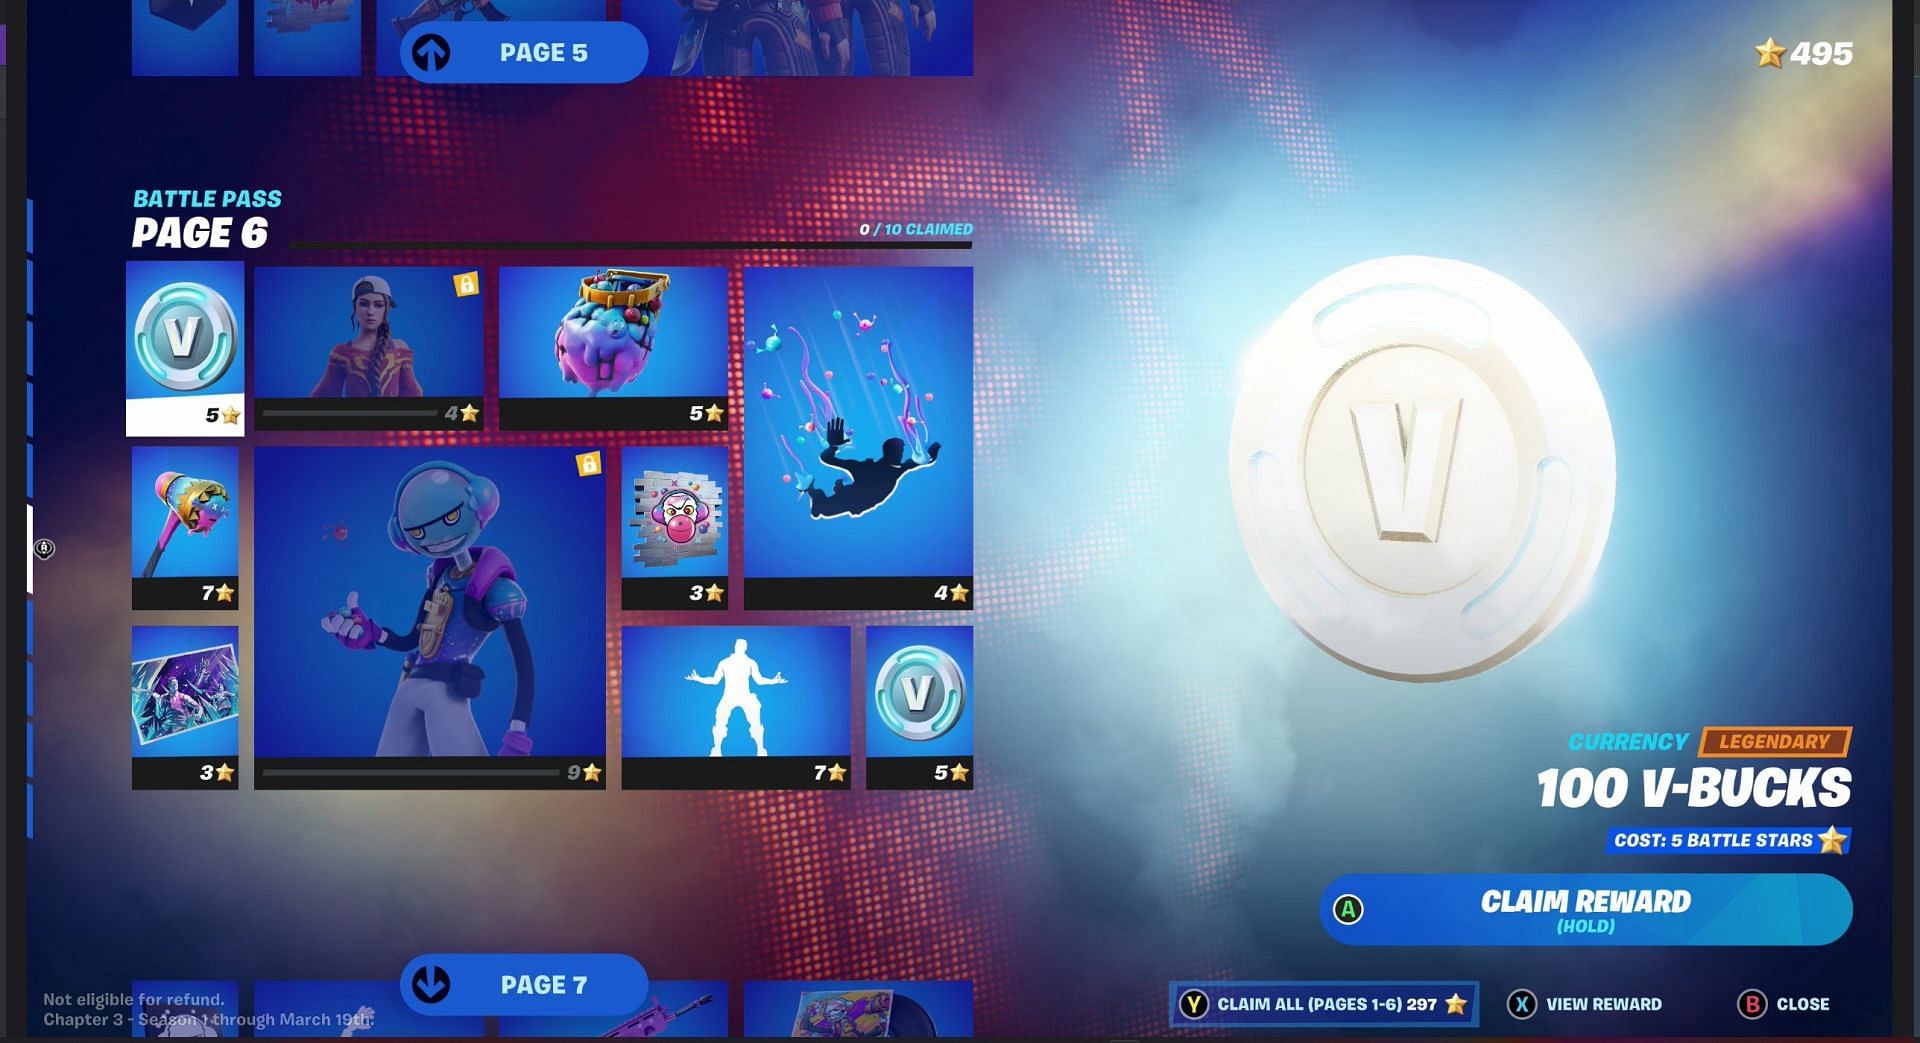 Page 6 of the Battle Pass (Image via Fortnite)